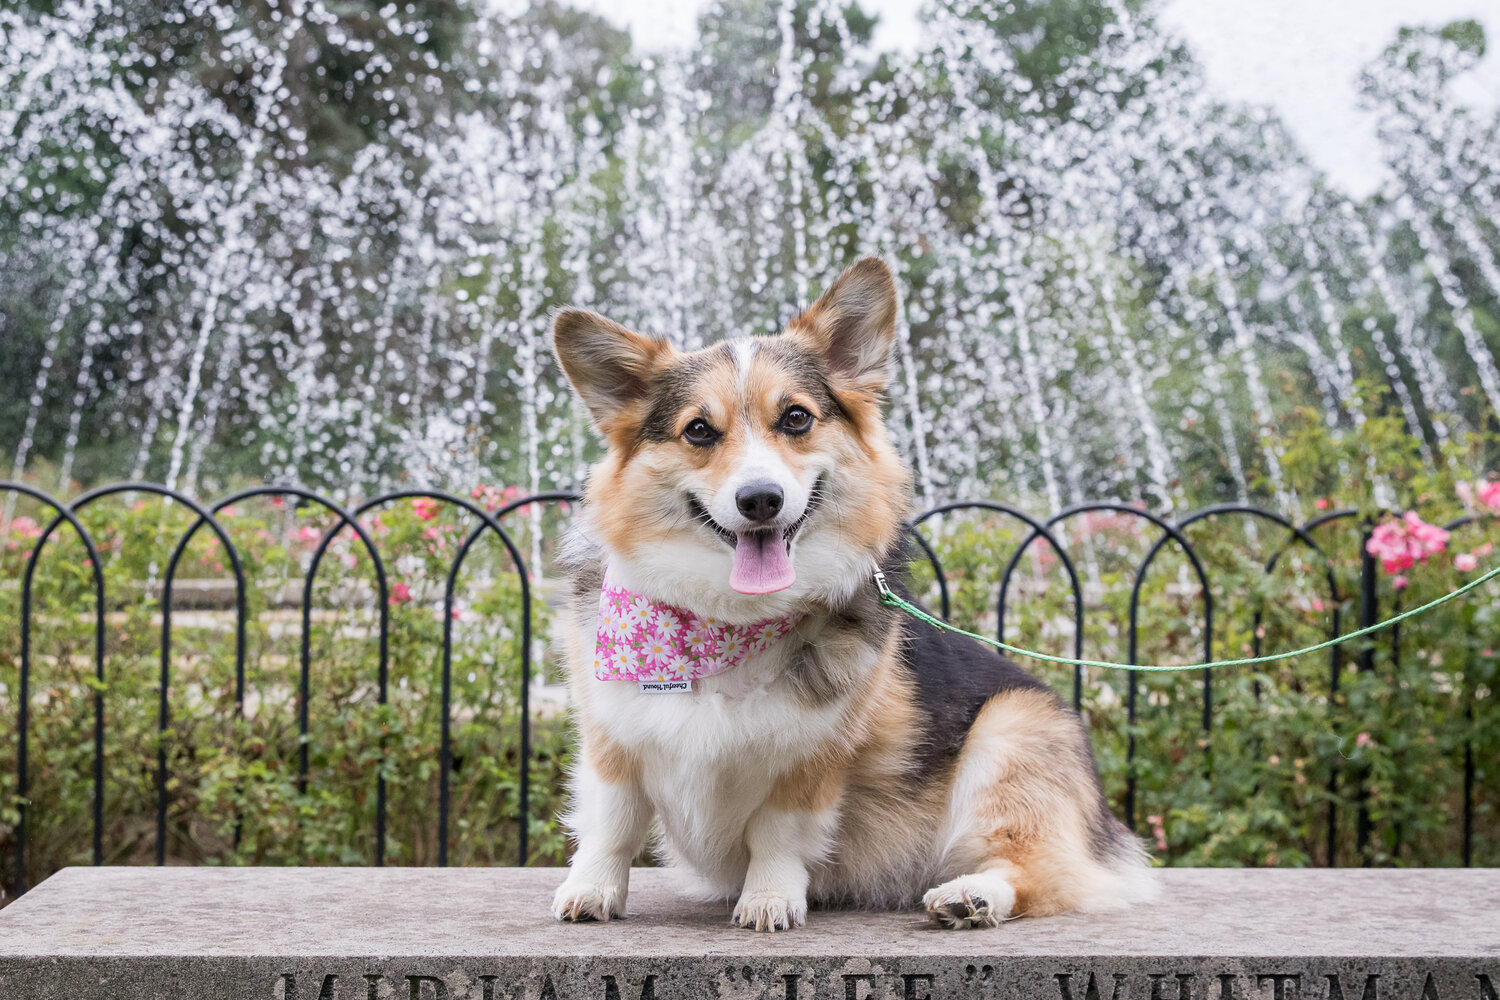 Pet Friendly Dog Days of Summer Mini Session